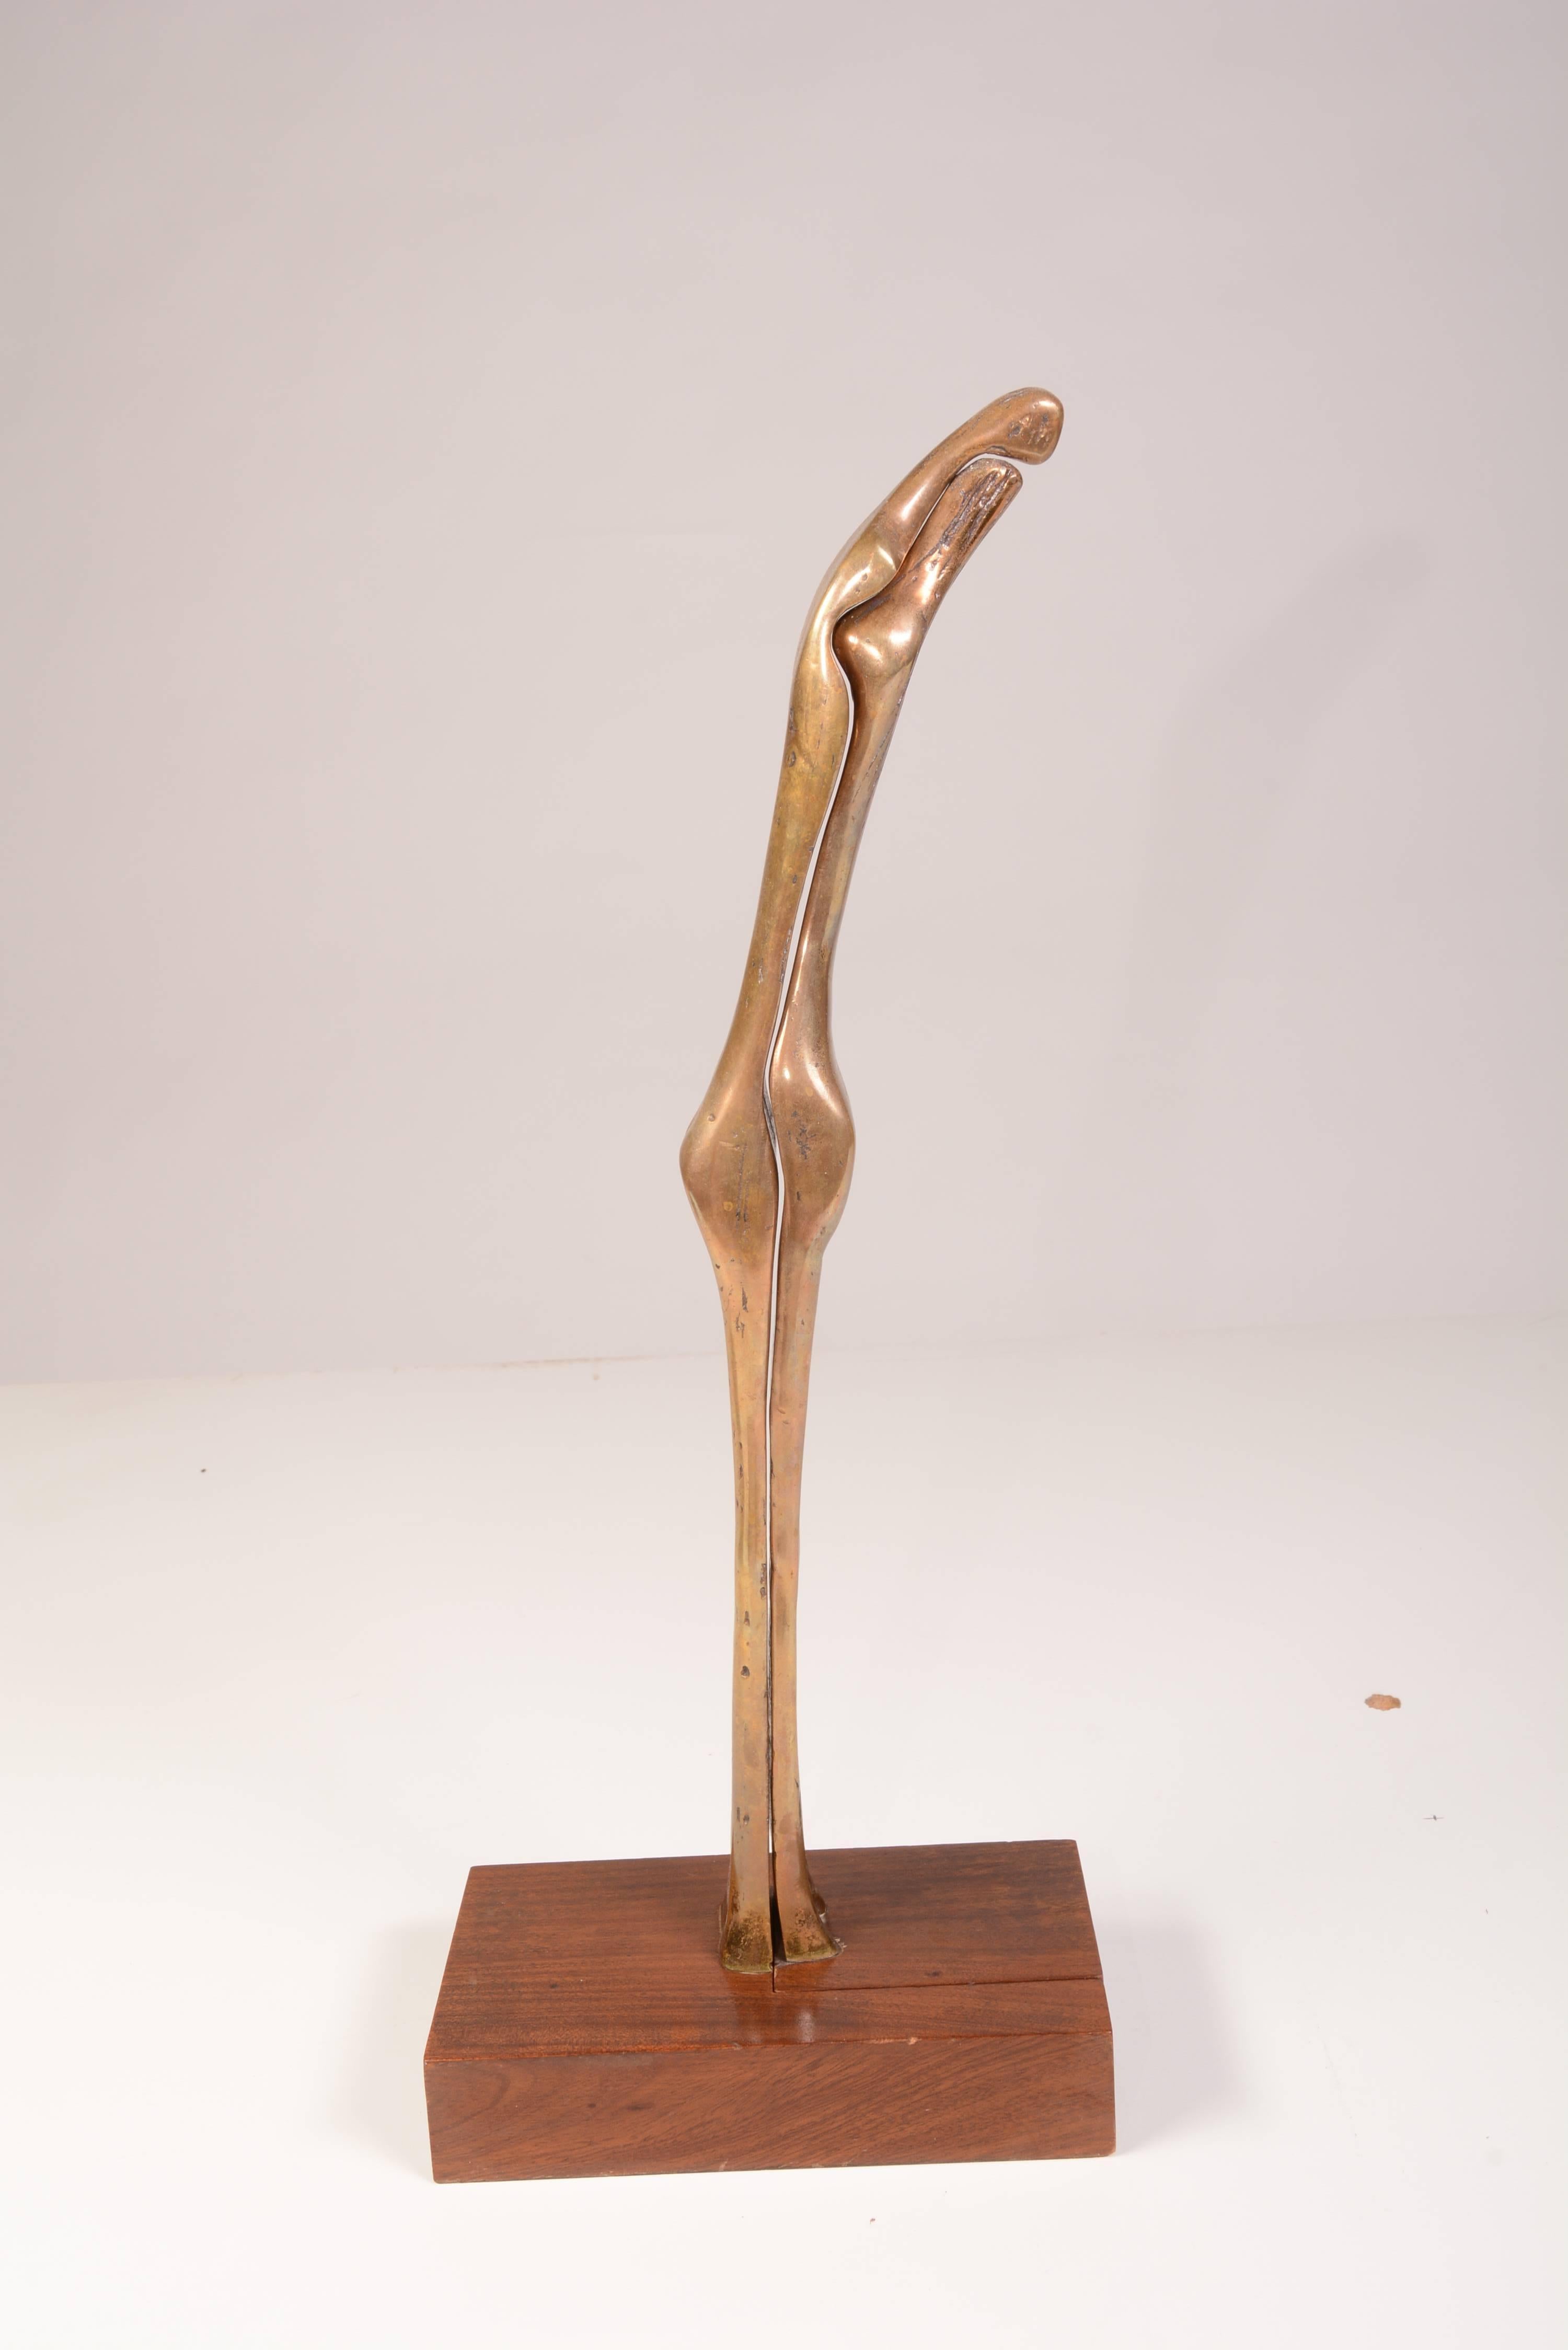 This is a rare and great example of Aharon Bezalels beautiful and evocative work. Aharon Bezalel lived and worked in Jerusalem. 
He studied carving and sculpture with the artists Martin Rost and Zeev Ben Tzvi at the Bezalel Academy for Arts and